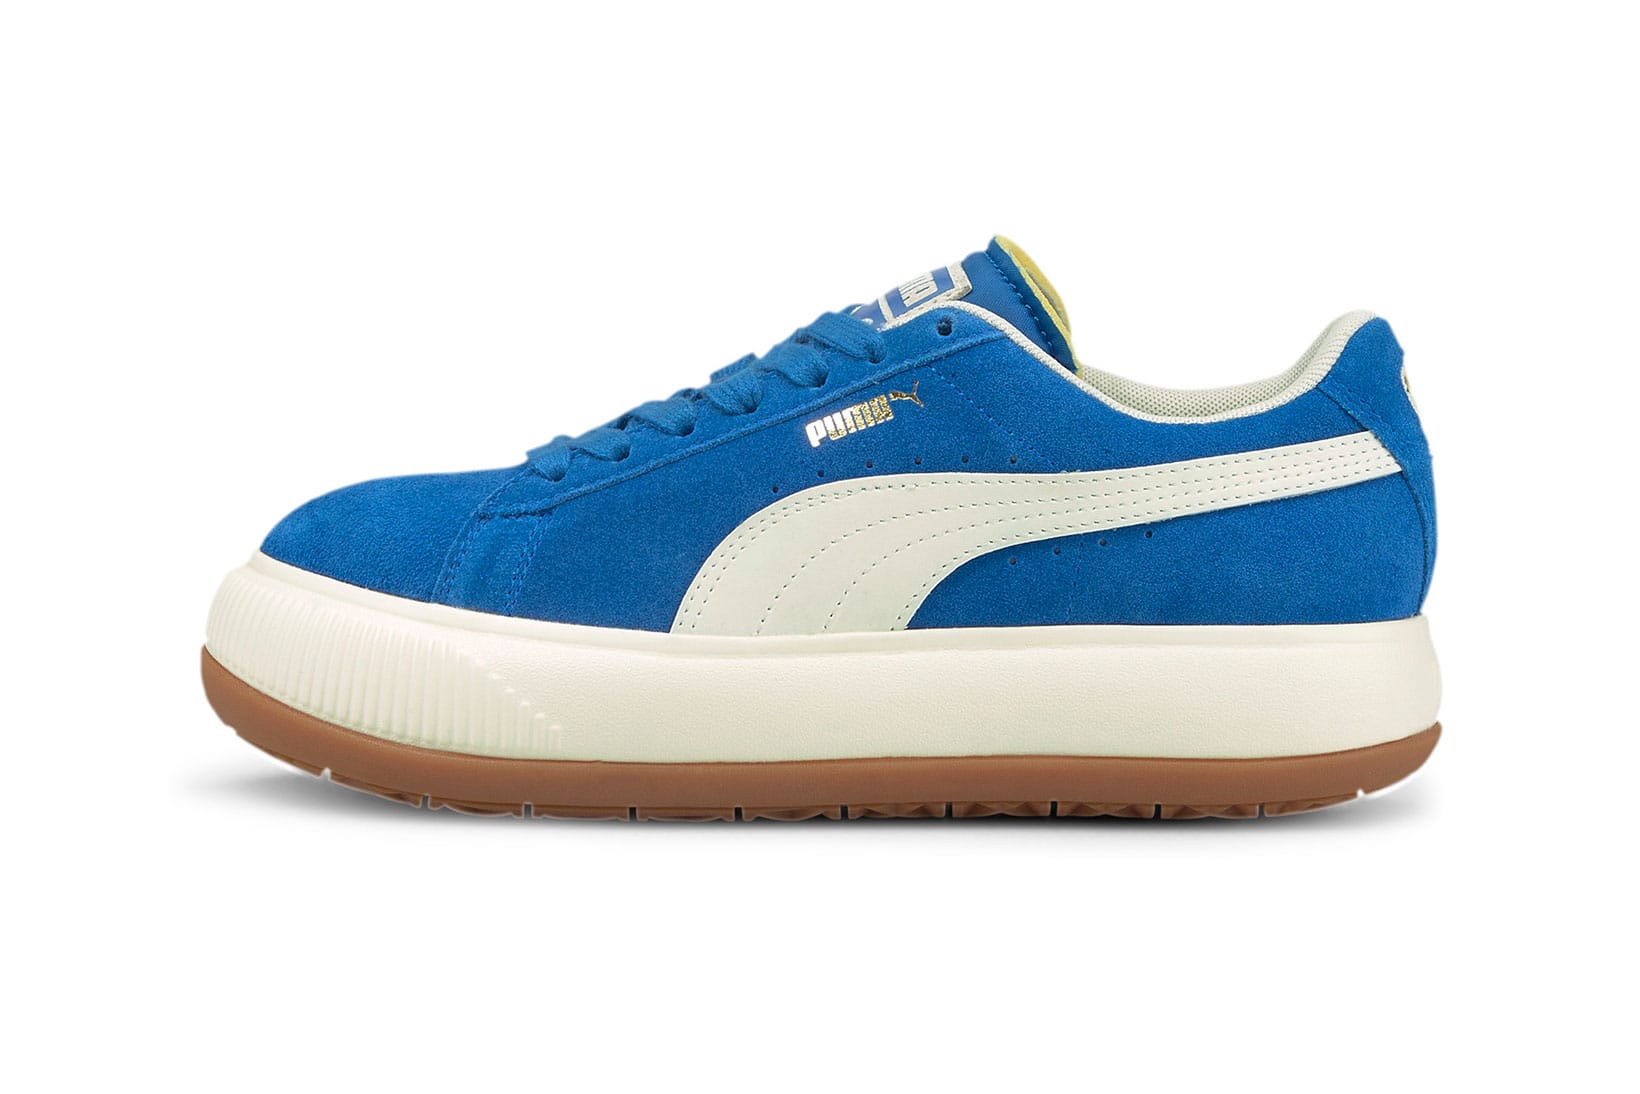 puma shoes that look like air force ones